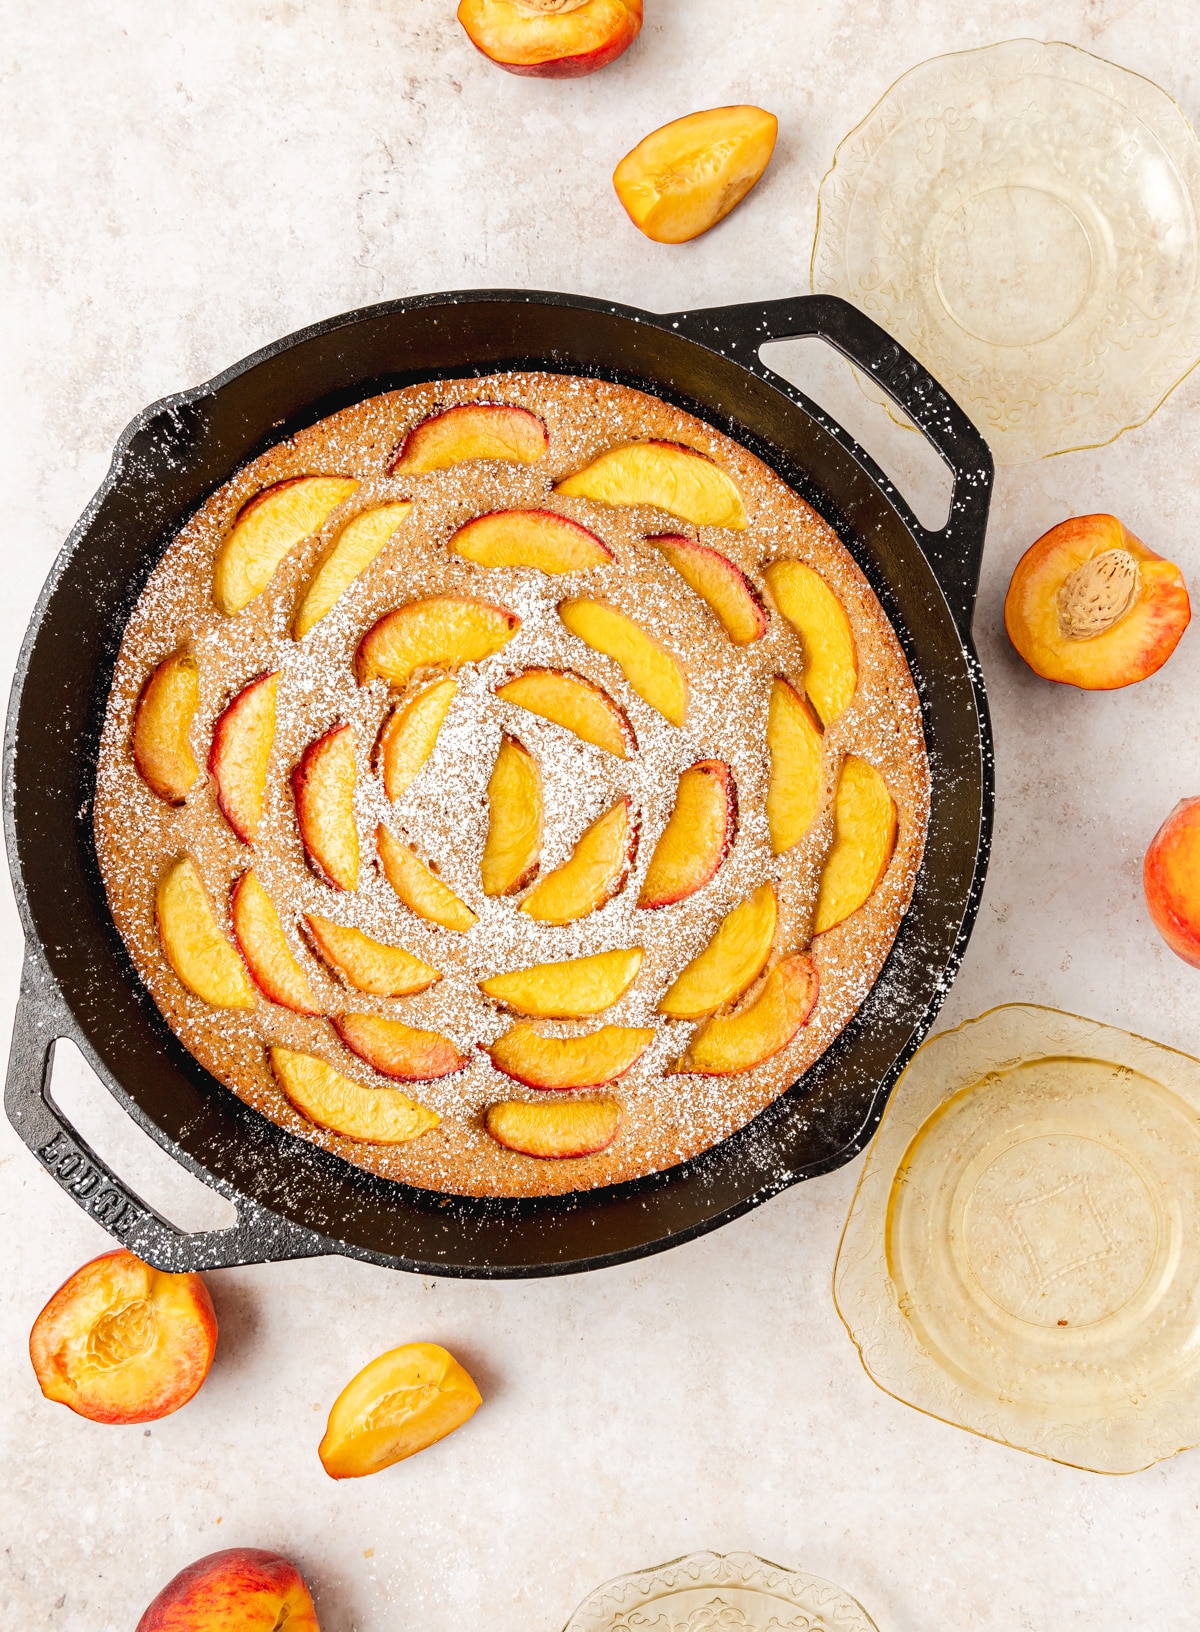 brown butter peach skillet cake dusted with powdered sugar